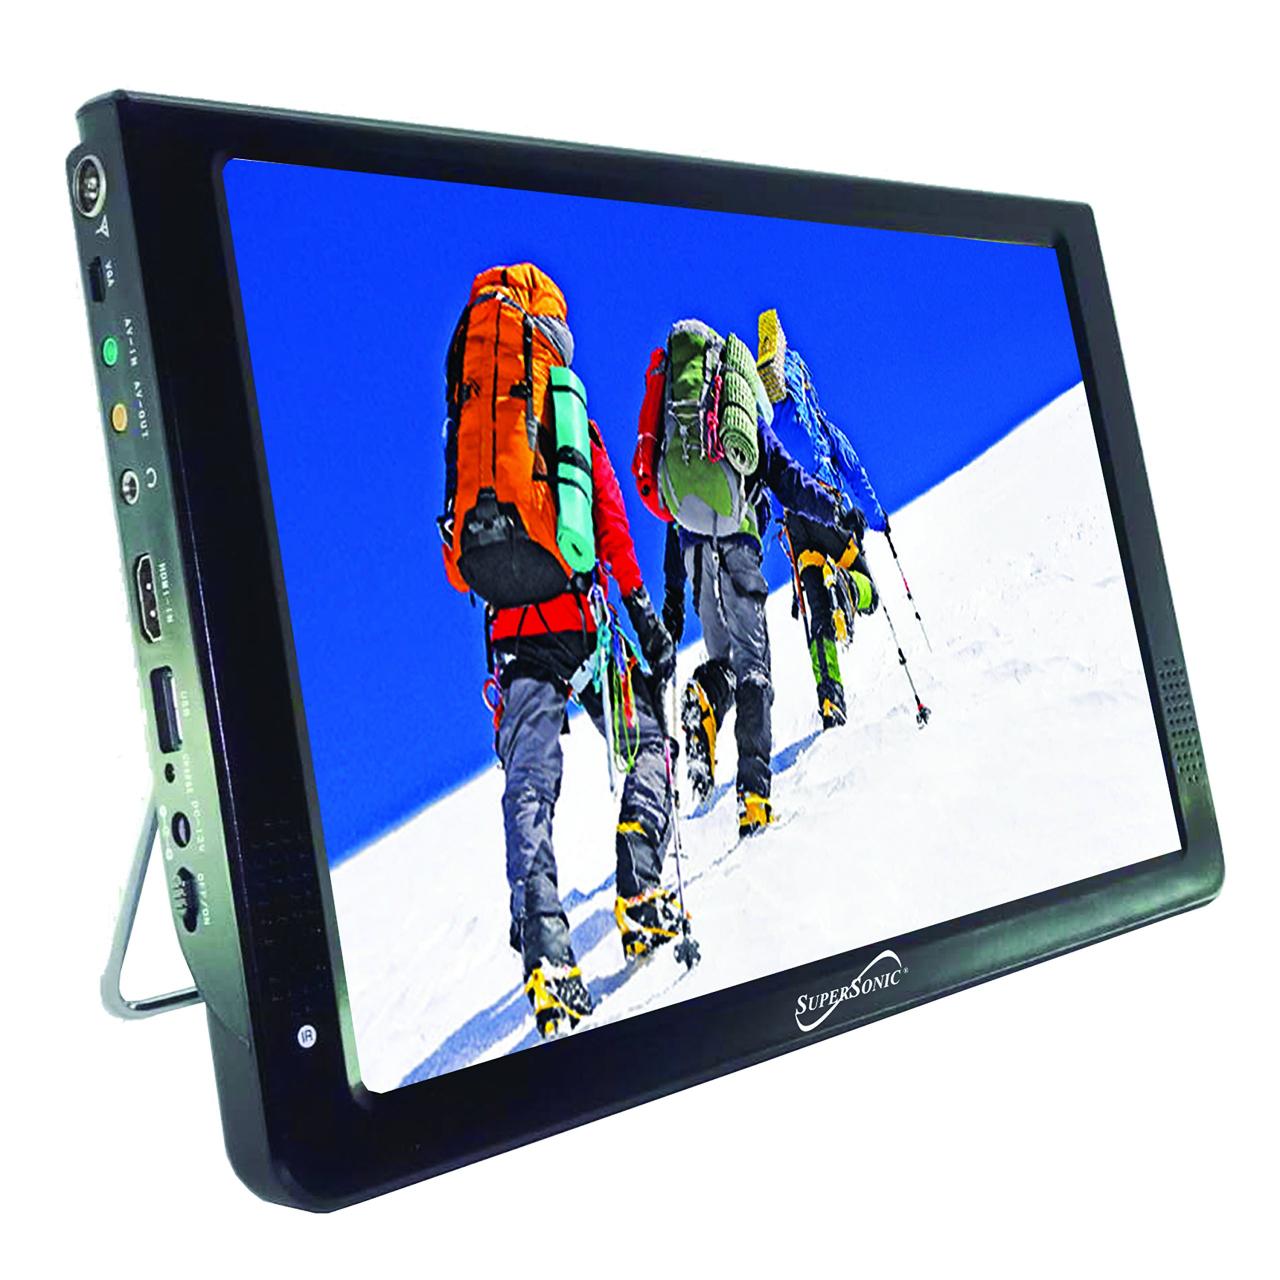 Supersonic SC-2812 Portable Widescreen LCD Display with Digital TV Tuner,  USB/SD Inputs and AC/DC Compatible for RVs (12-inch), Black: Buy Online at  Best Price in UAE - Amazon.ae